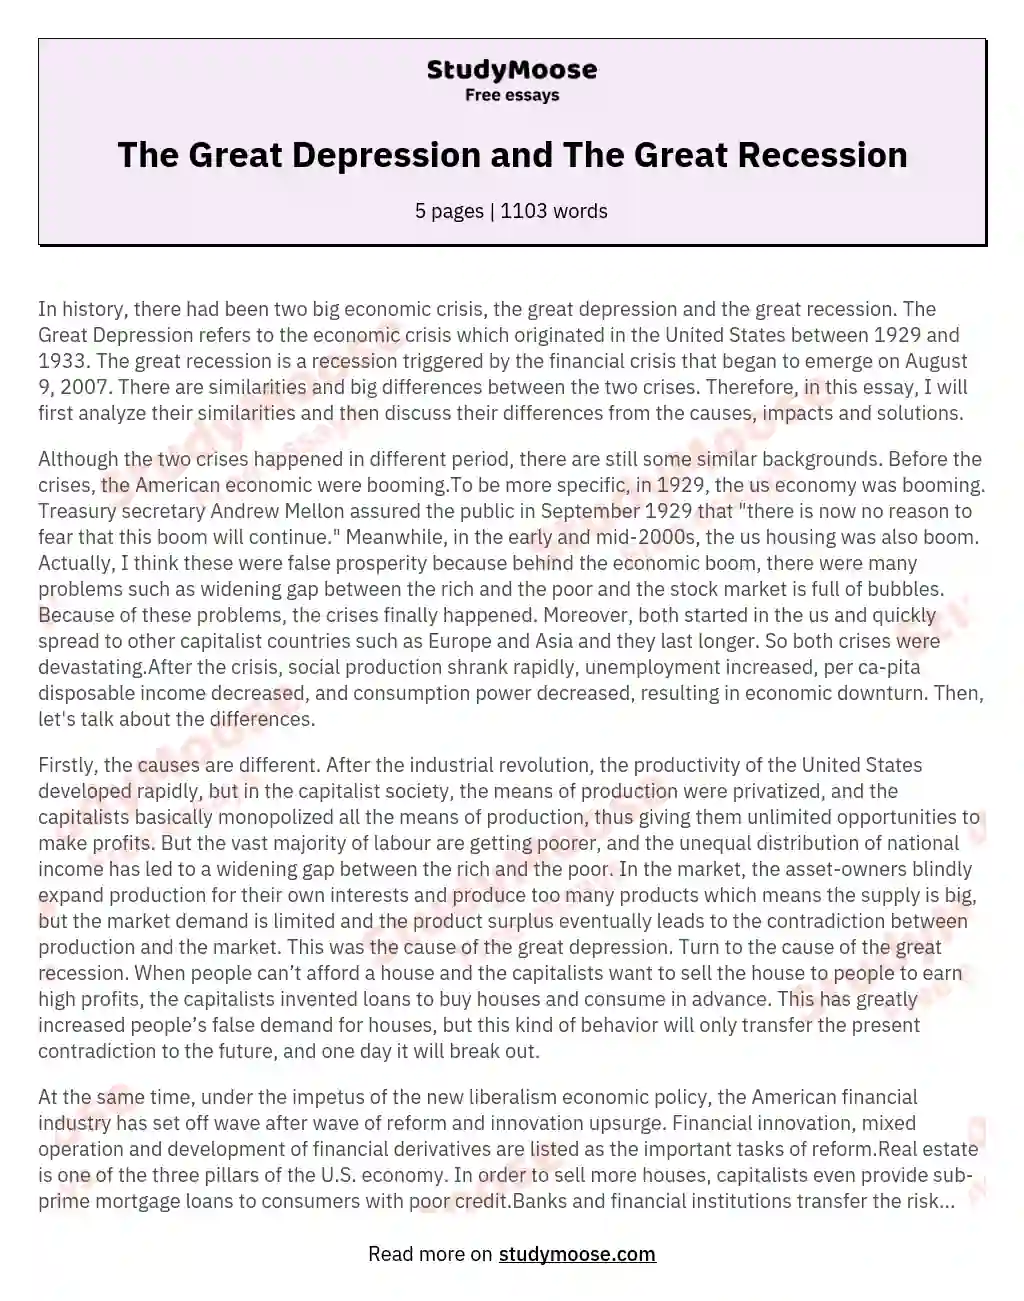 how to start an essay about the great depression